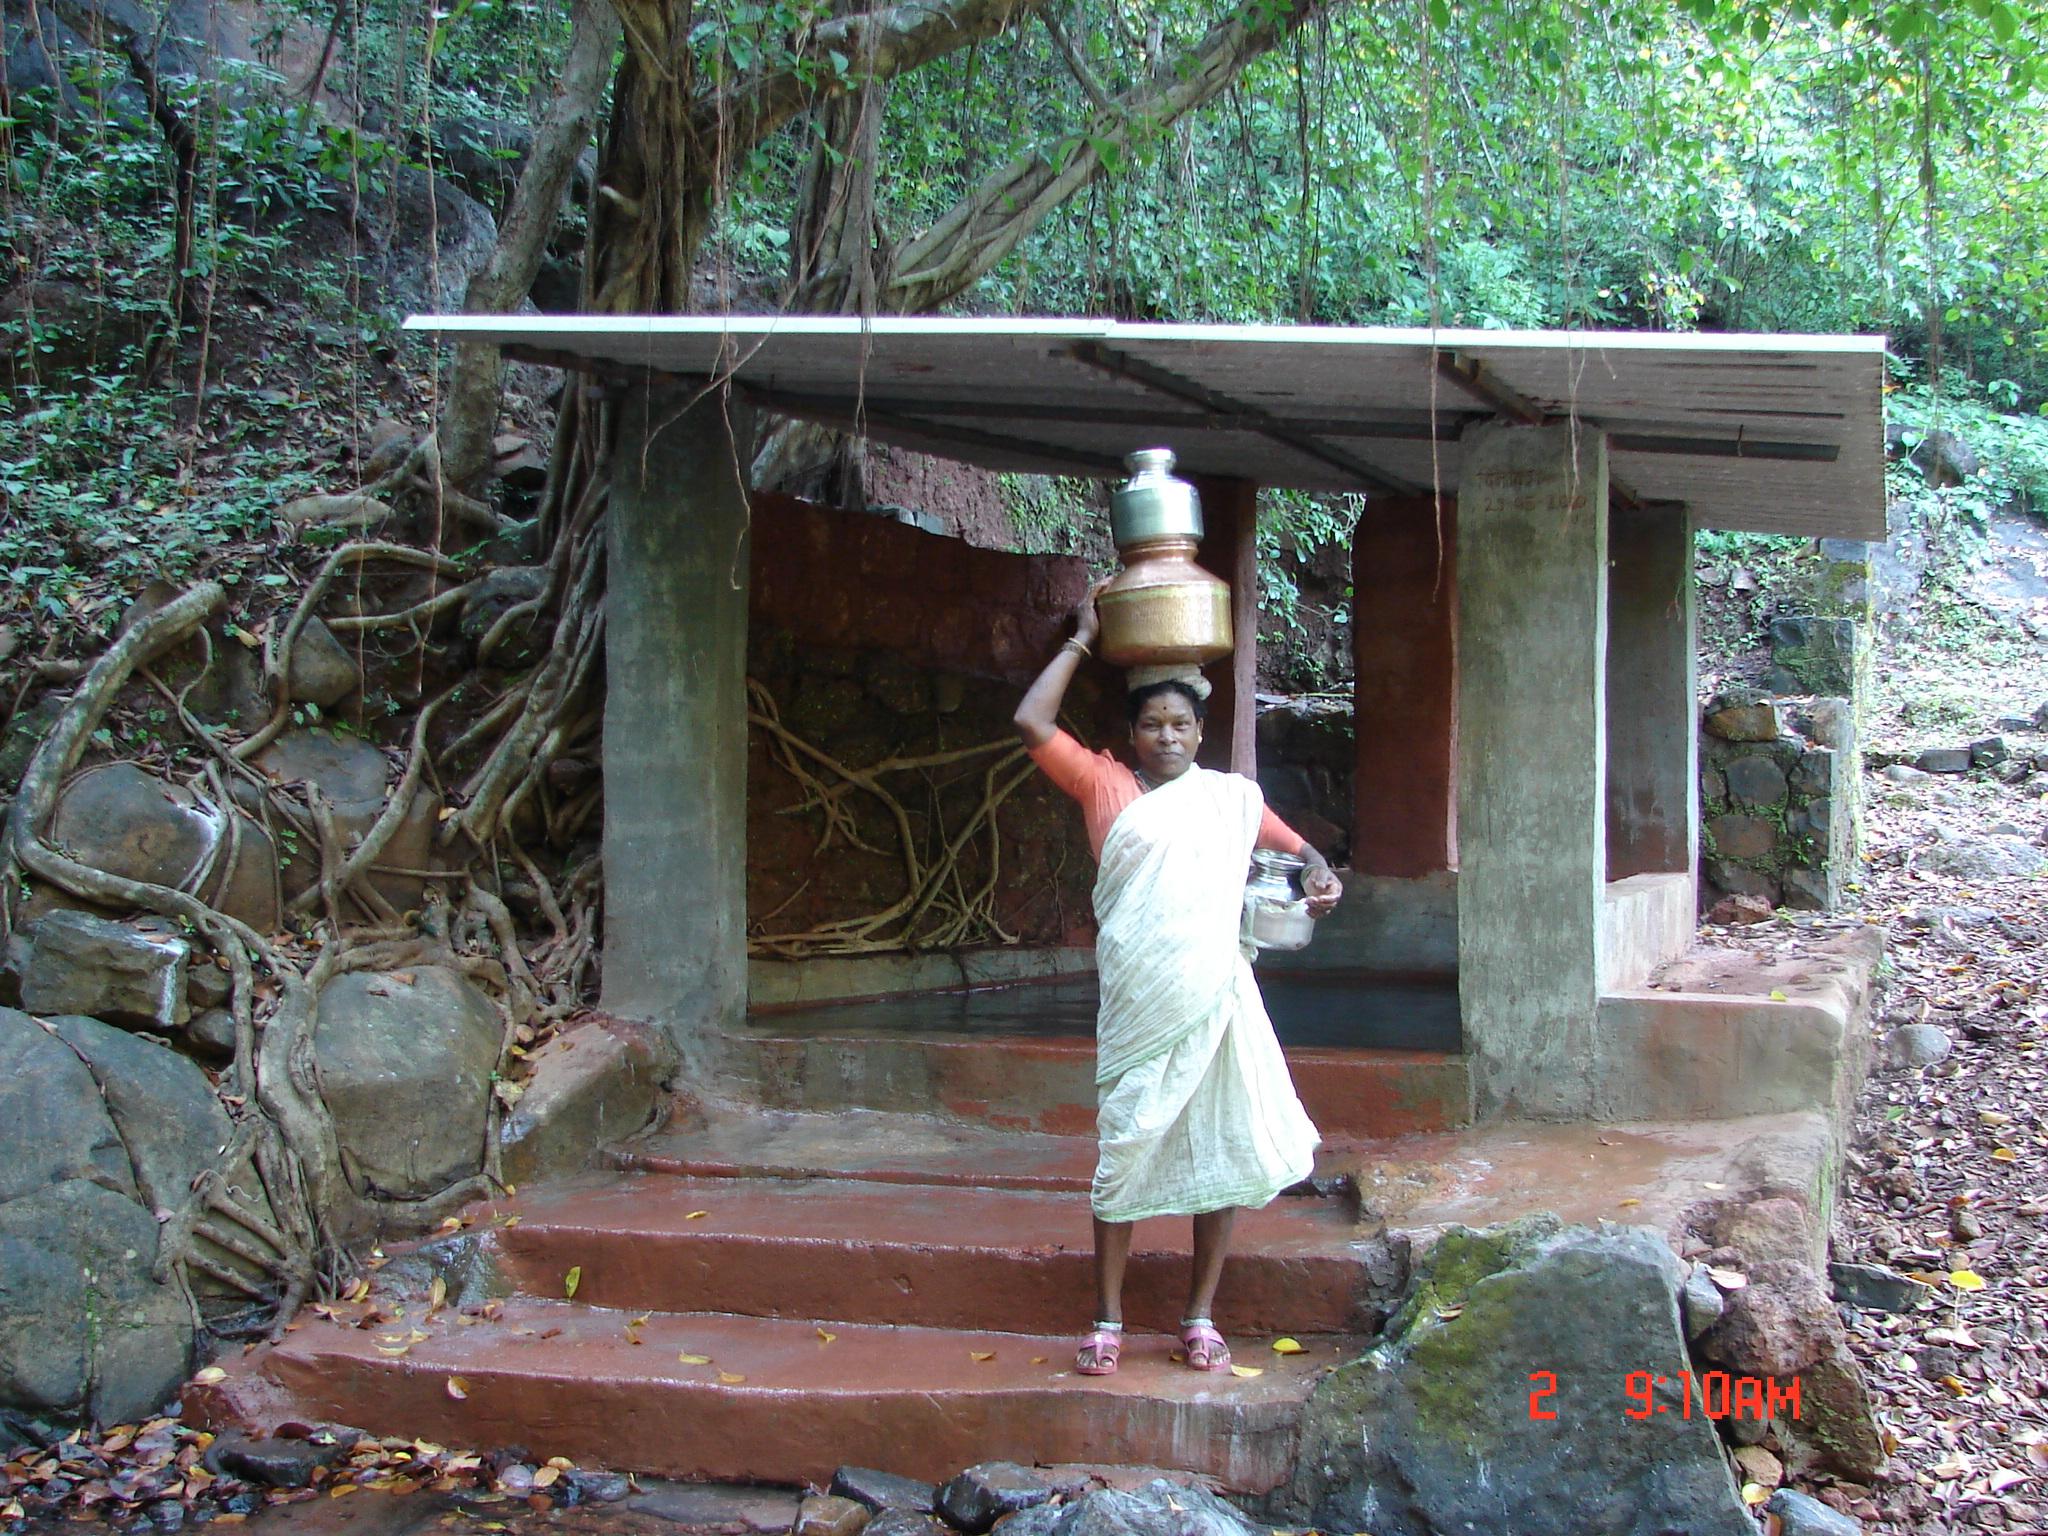 A spring tank built by the villagers at Temkar Waadi. Civets and Leopards are regular nocturnal visitors to these tanks.